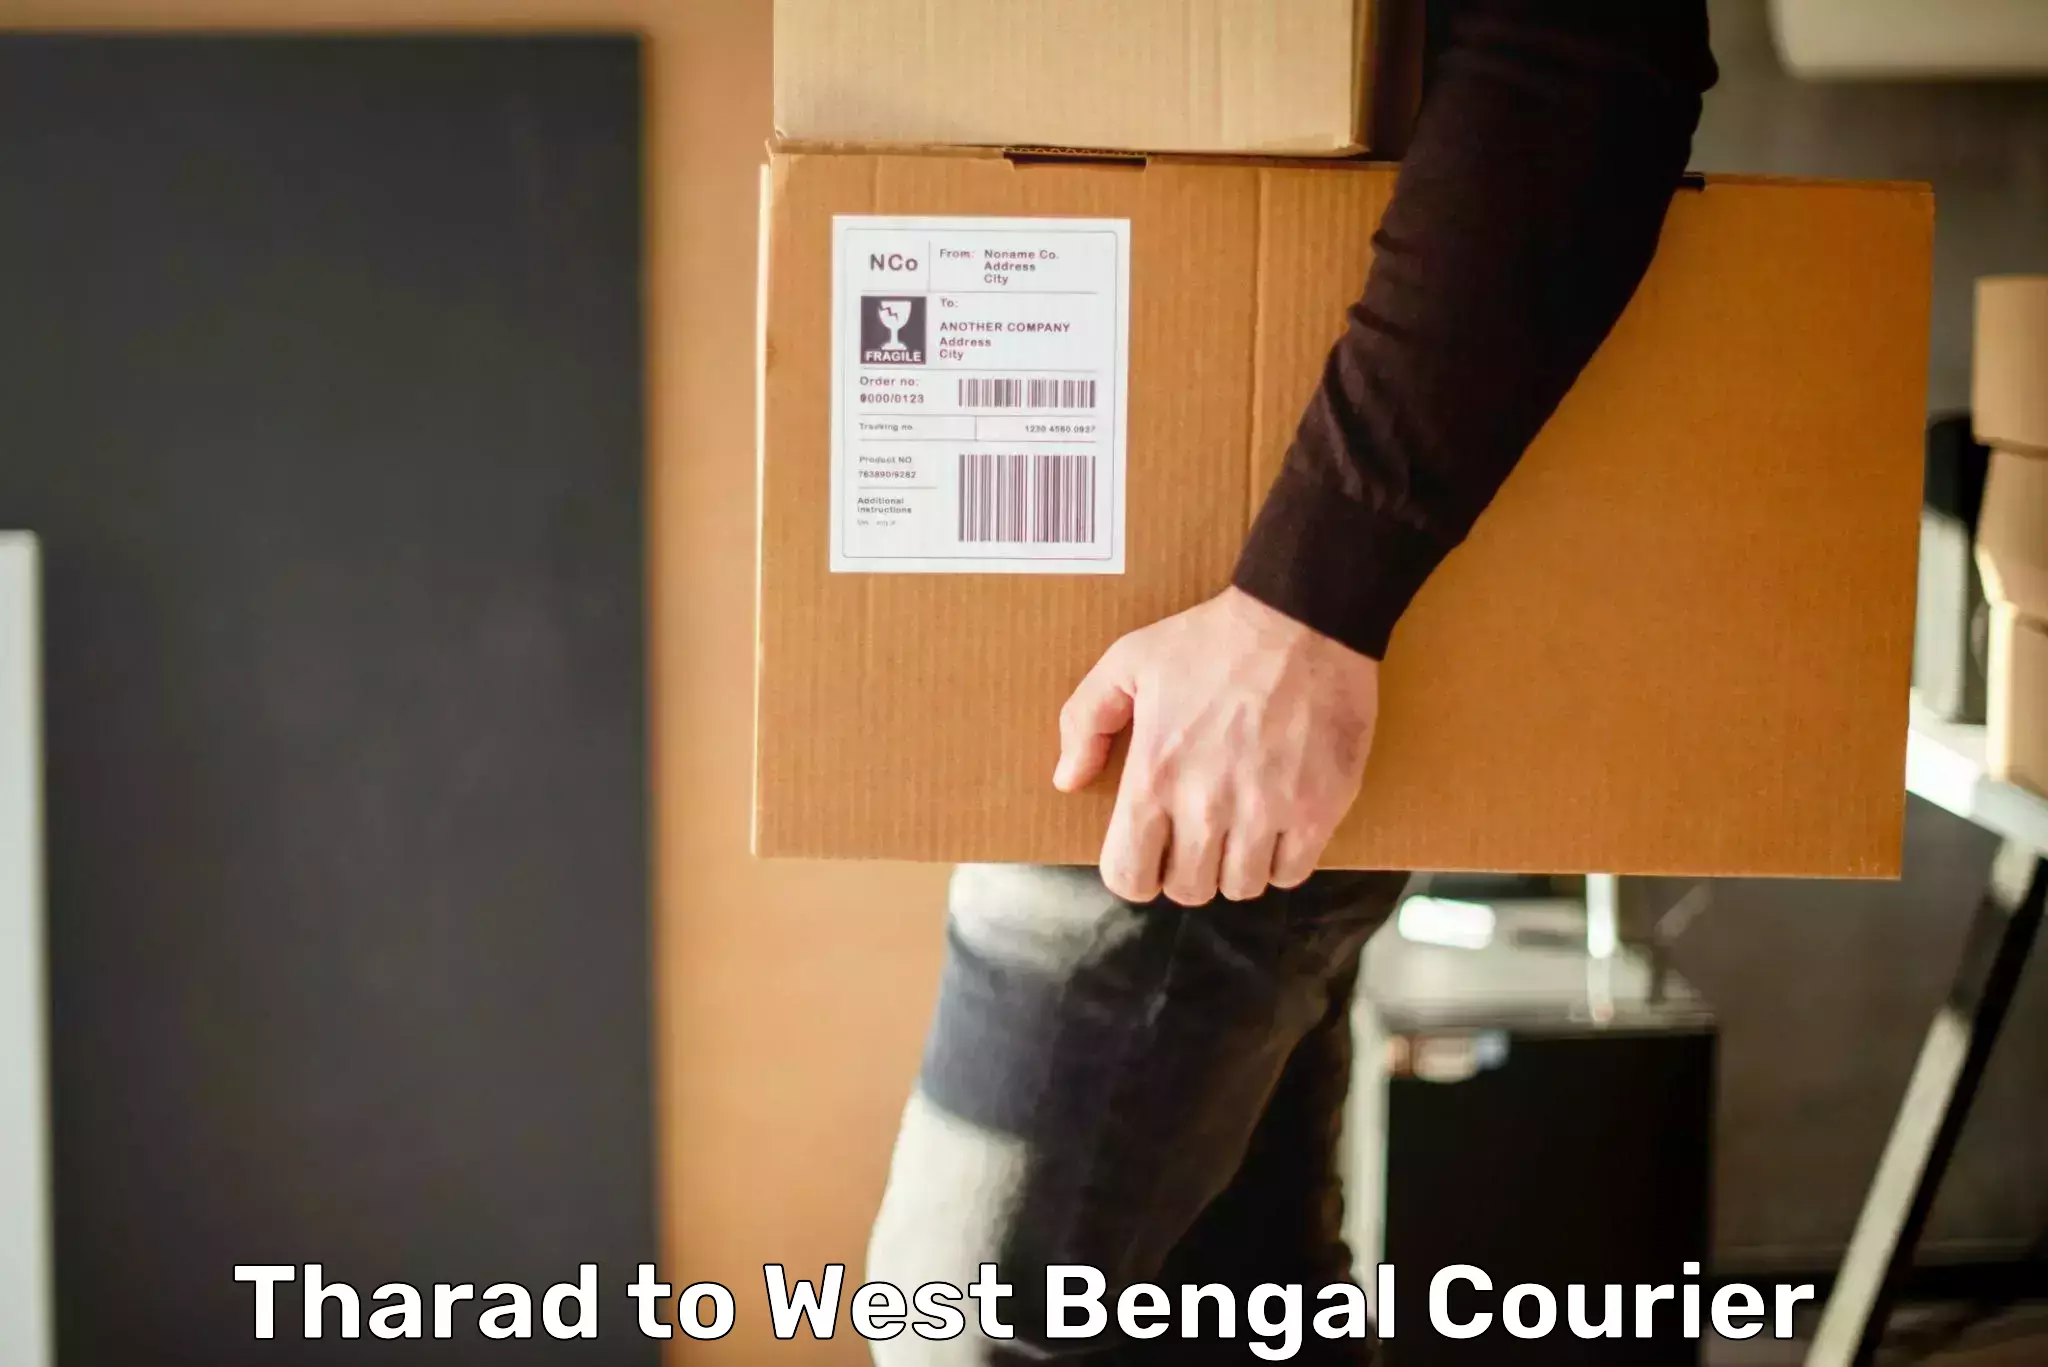 Subscription-based courier Tharad to Algarah